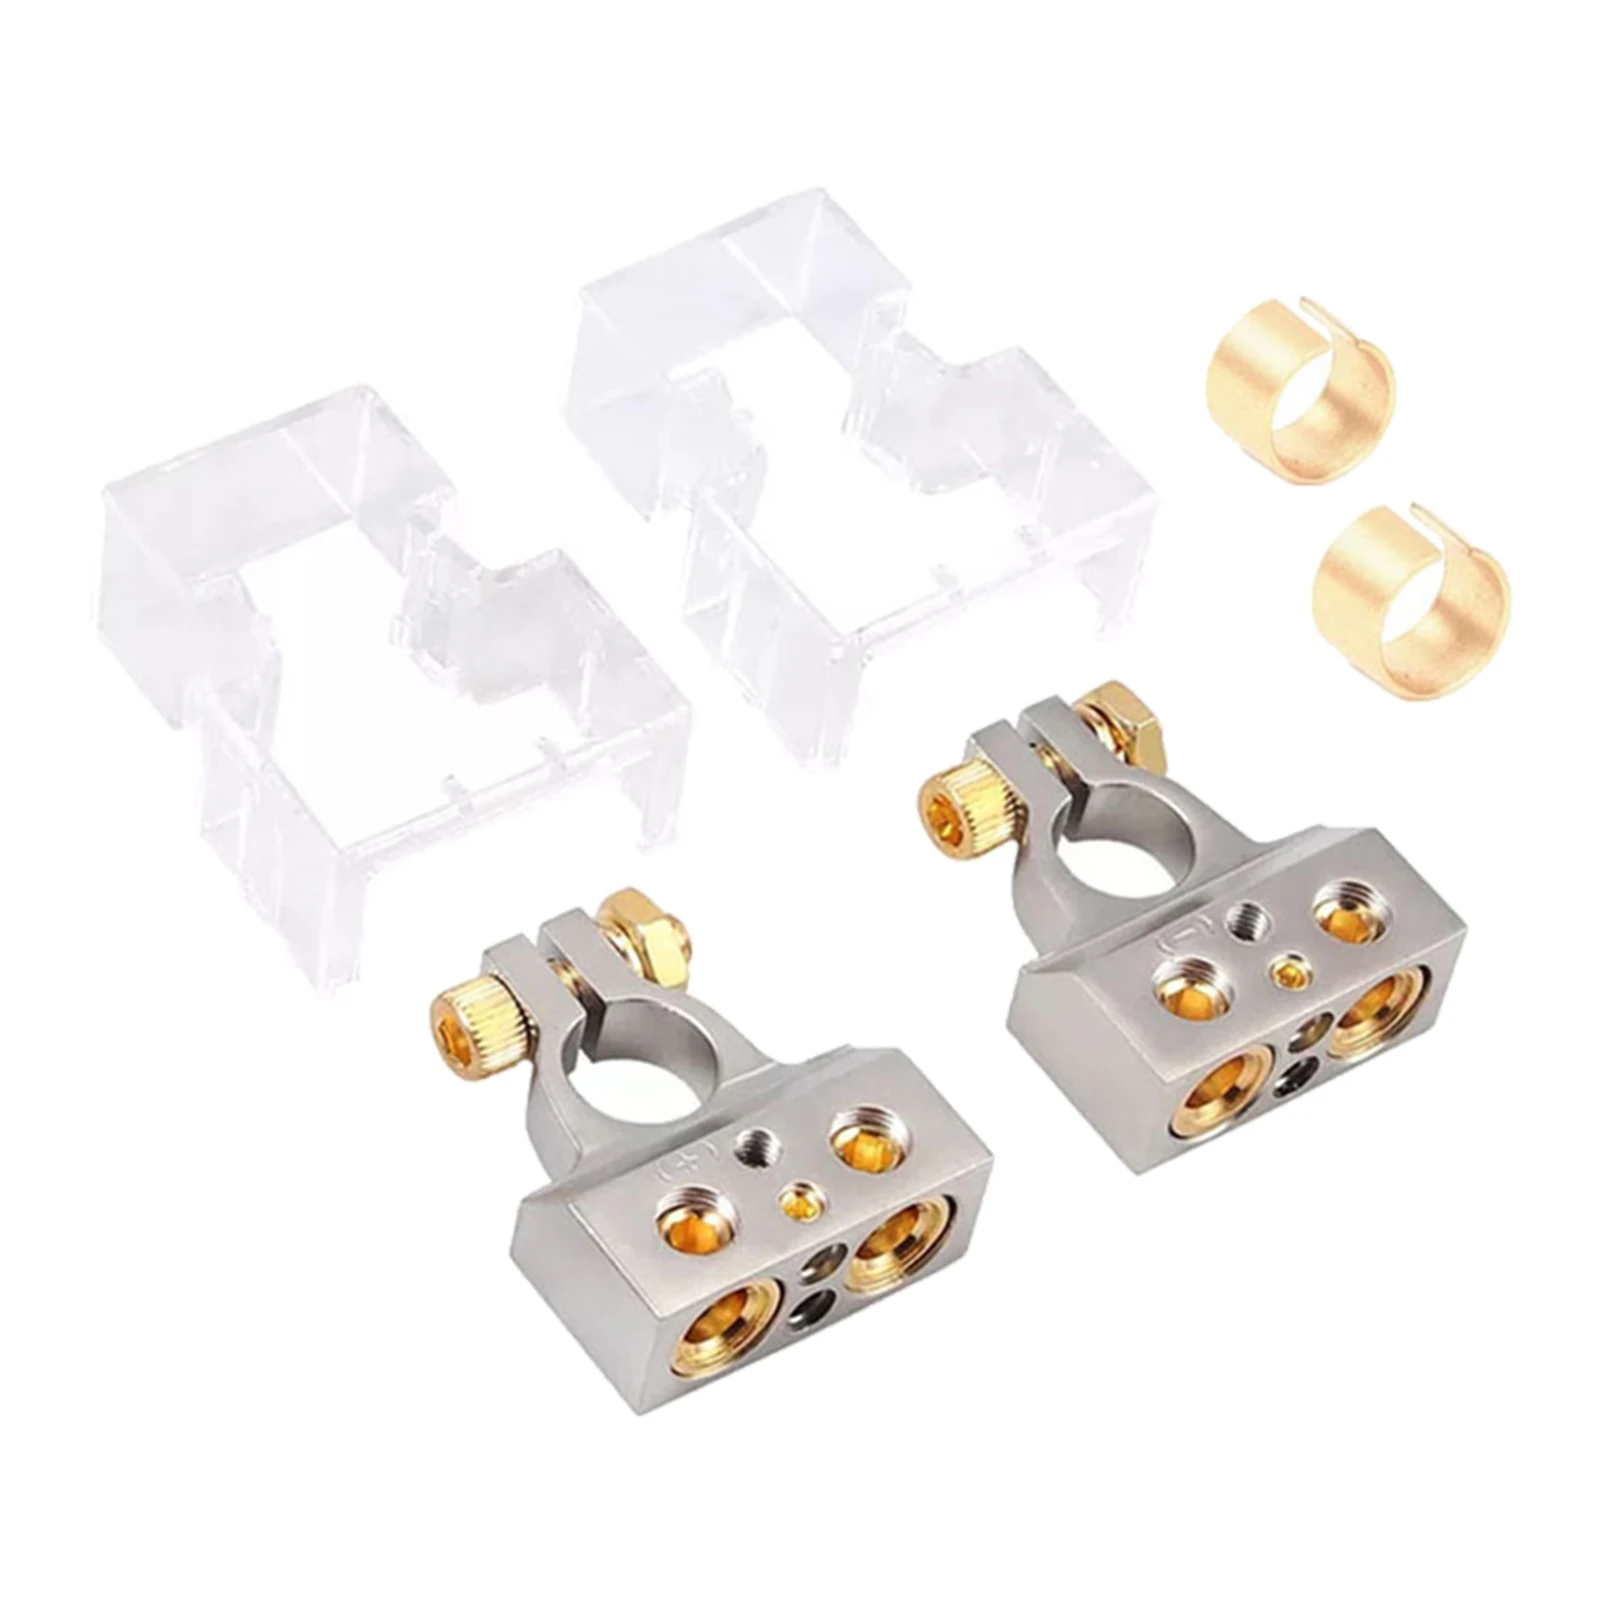 2 Packs Zinc Alloy Vehicles Battery Terminal Connector  Negative Battery  Clear Covers